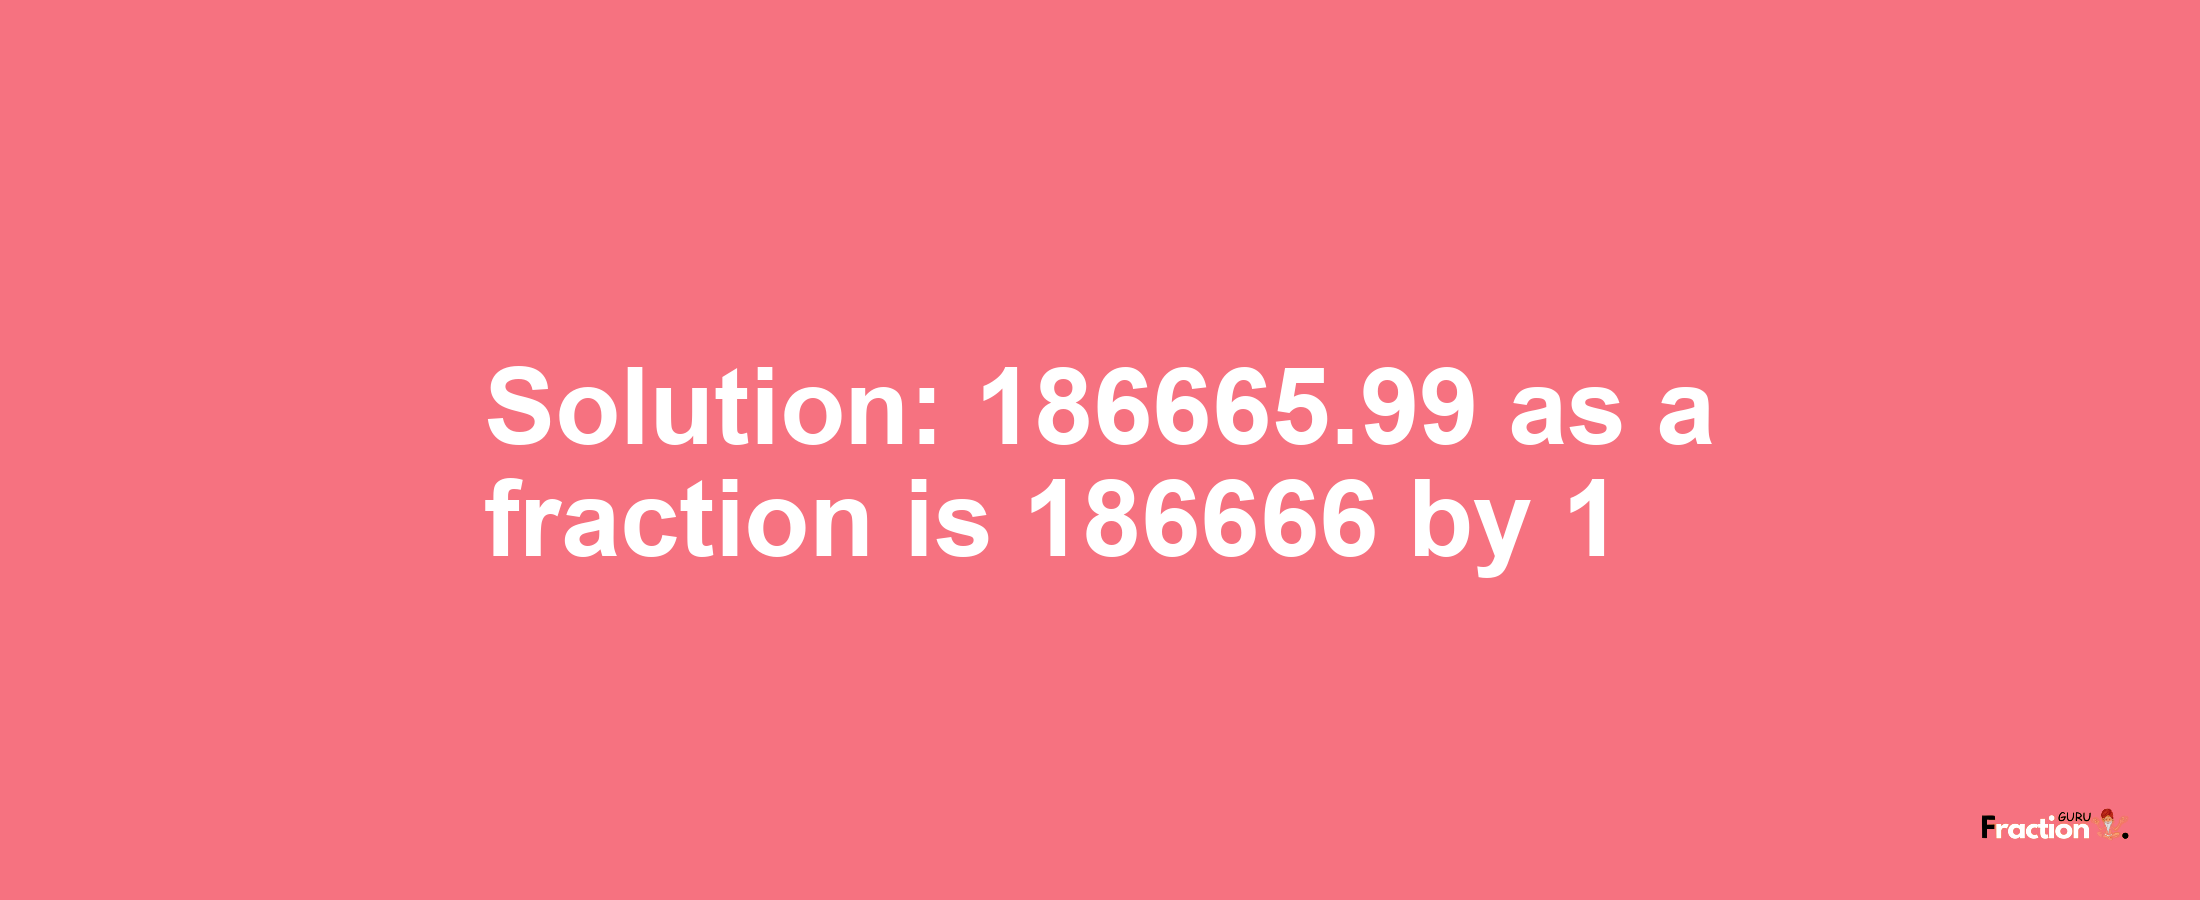 Solution:186665.99 as a fraction is 186666/1